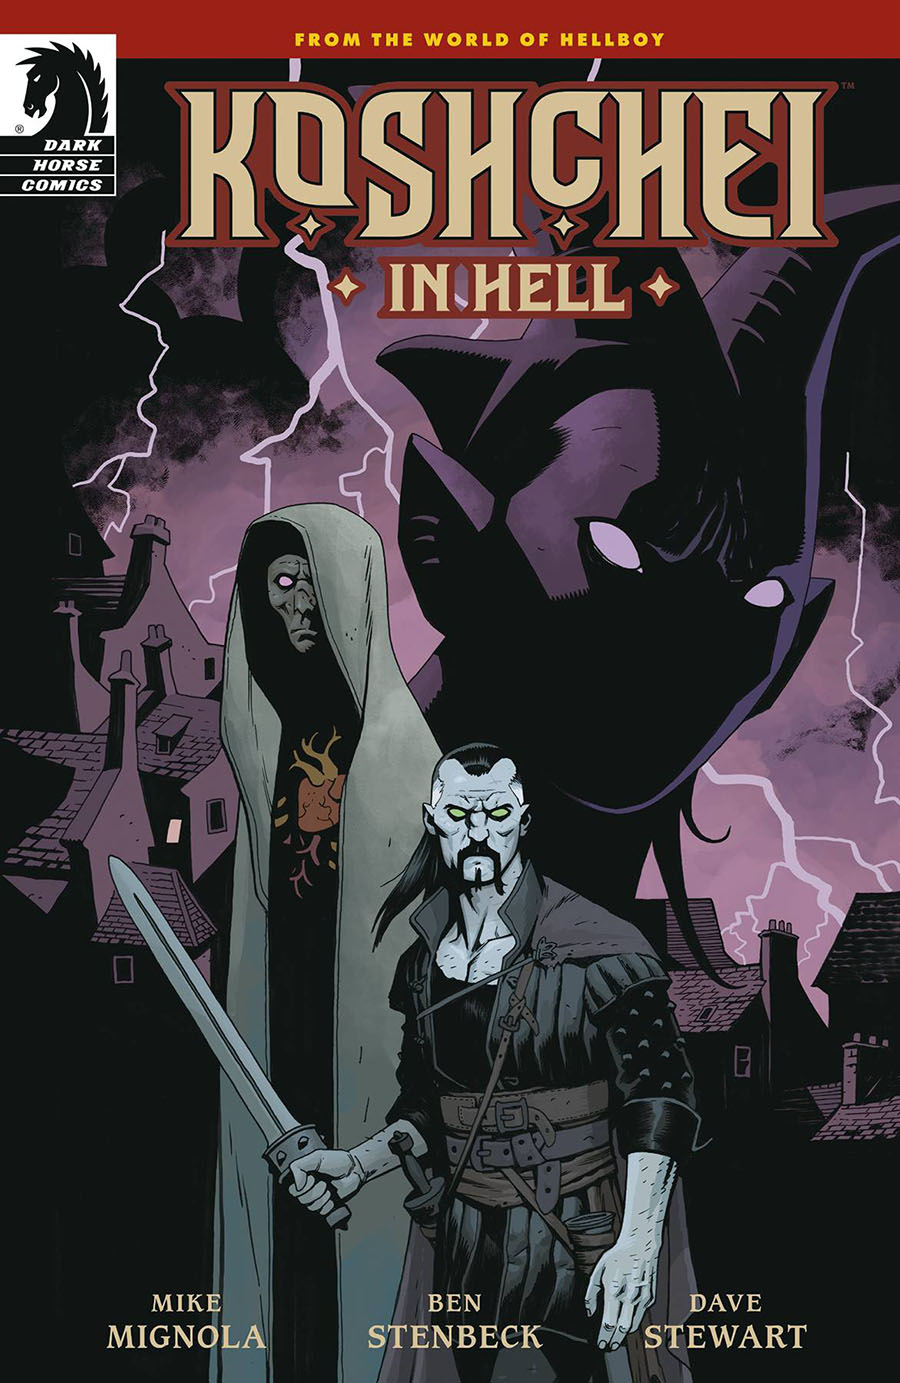 Koshchei The Deathless In Hell #1